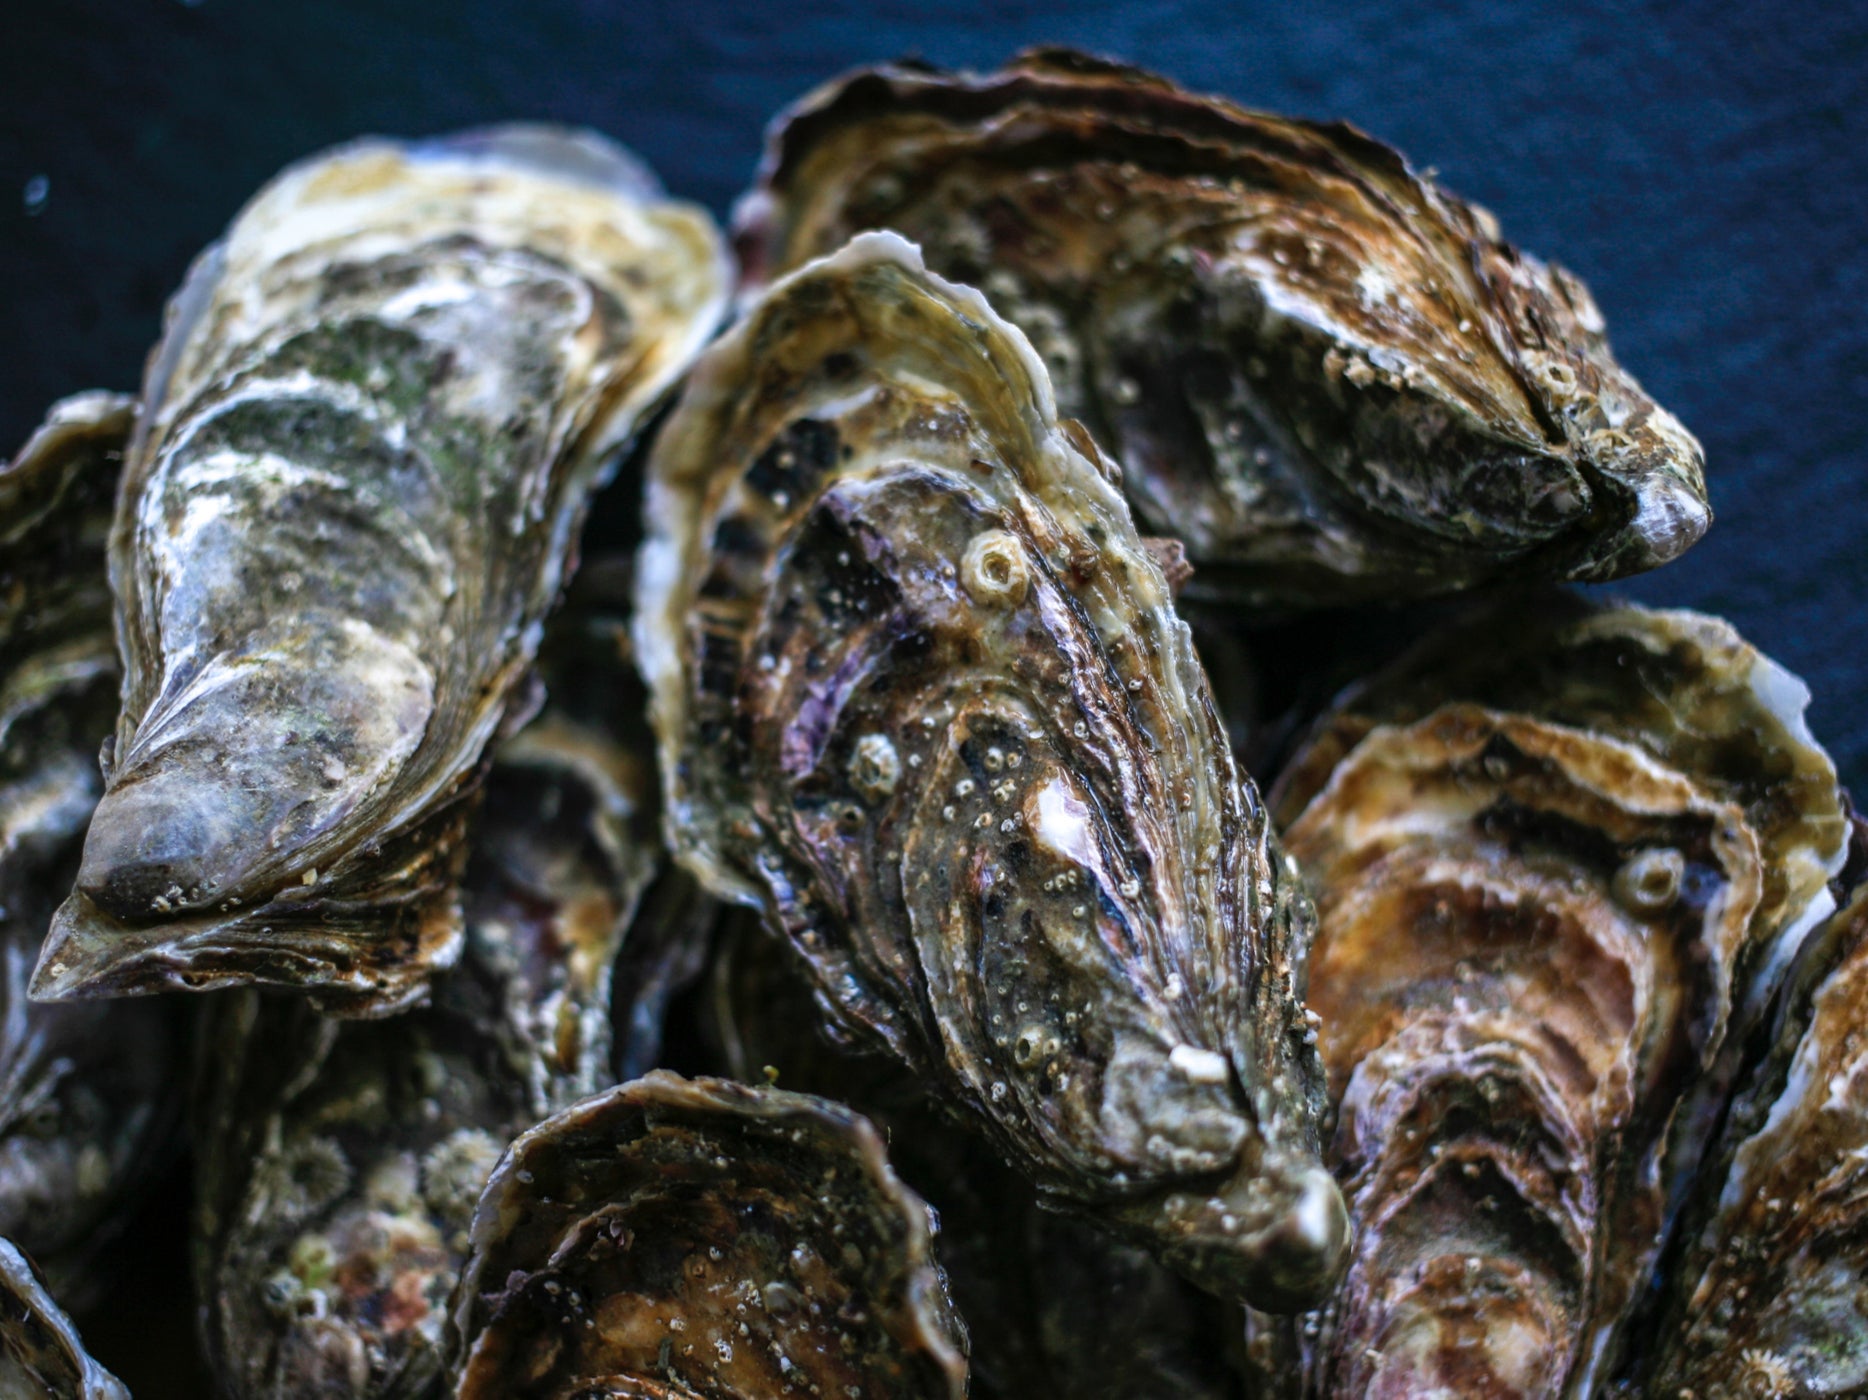 Oysters can filter over 200 litres of water a day, removing impurities and improving clarity